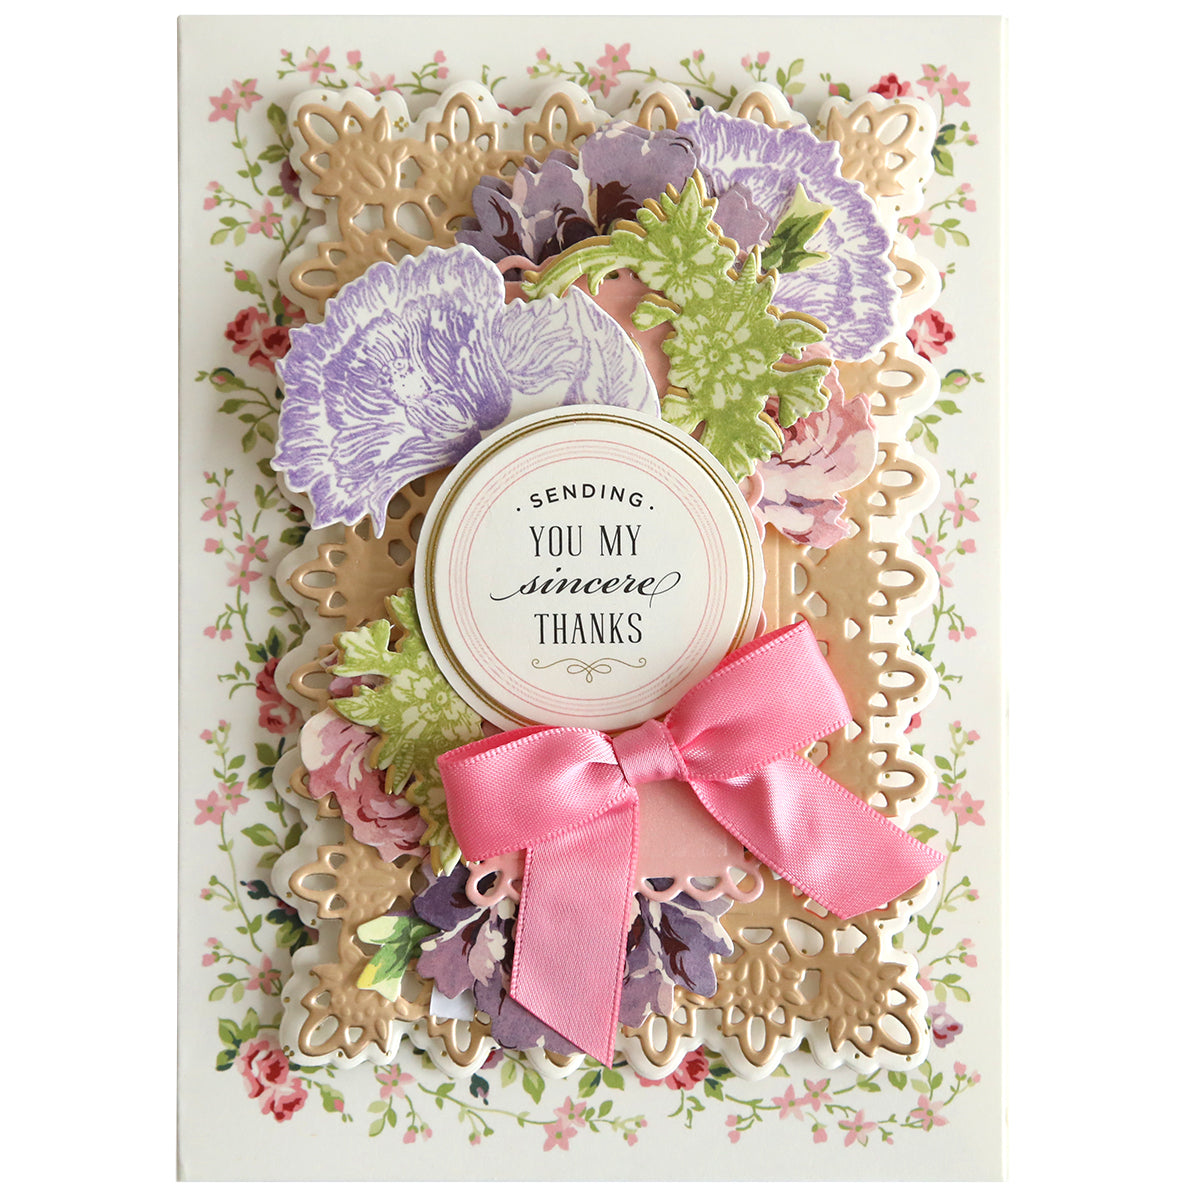 An ornate thank-you card decorated with Wildflower Meadow stamps, a pink ribbon, and a message reading "sending you my sincere thanks".